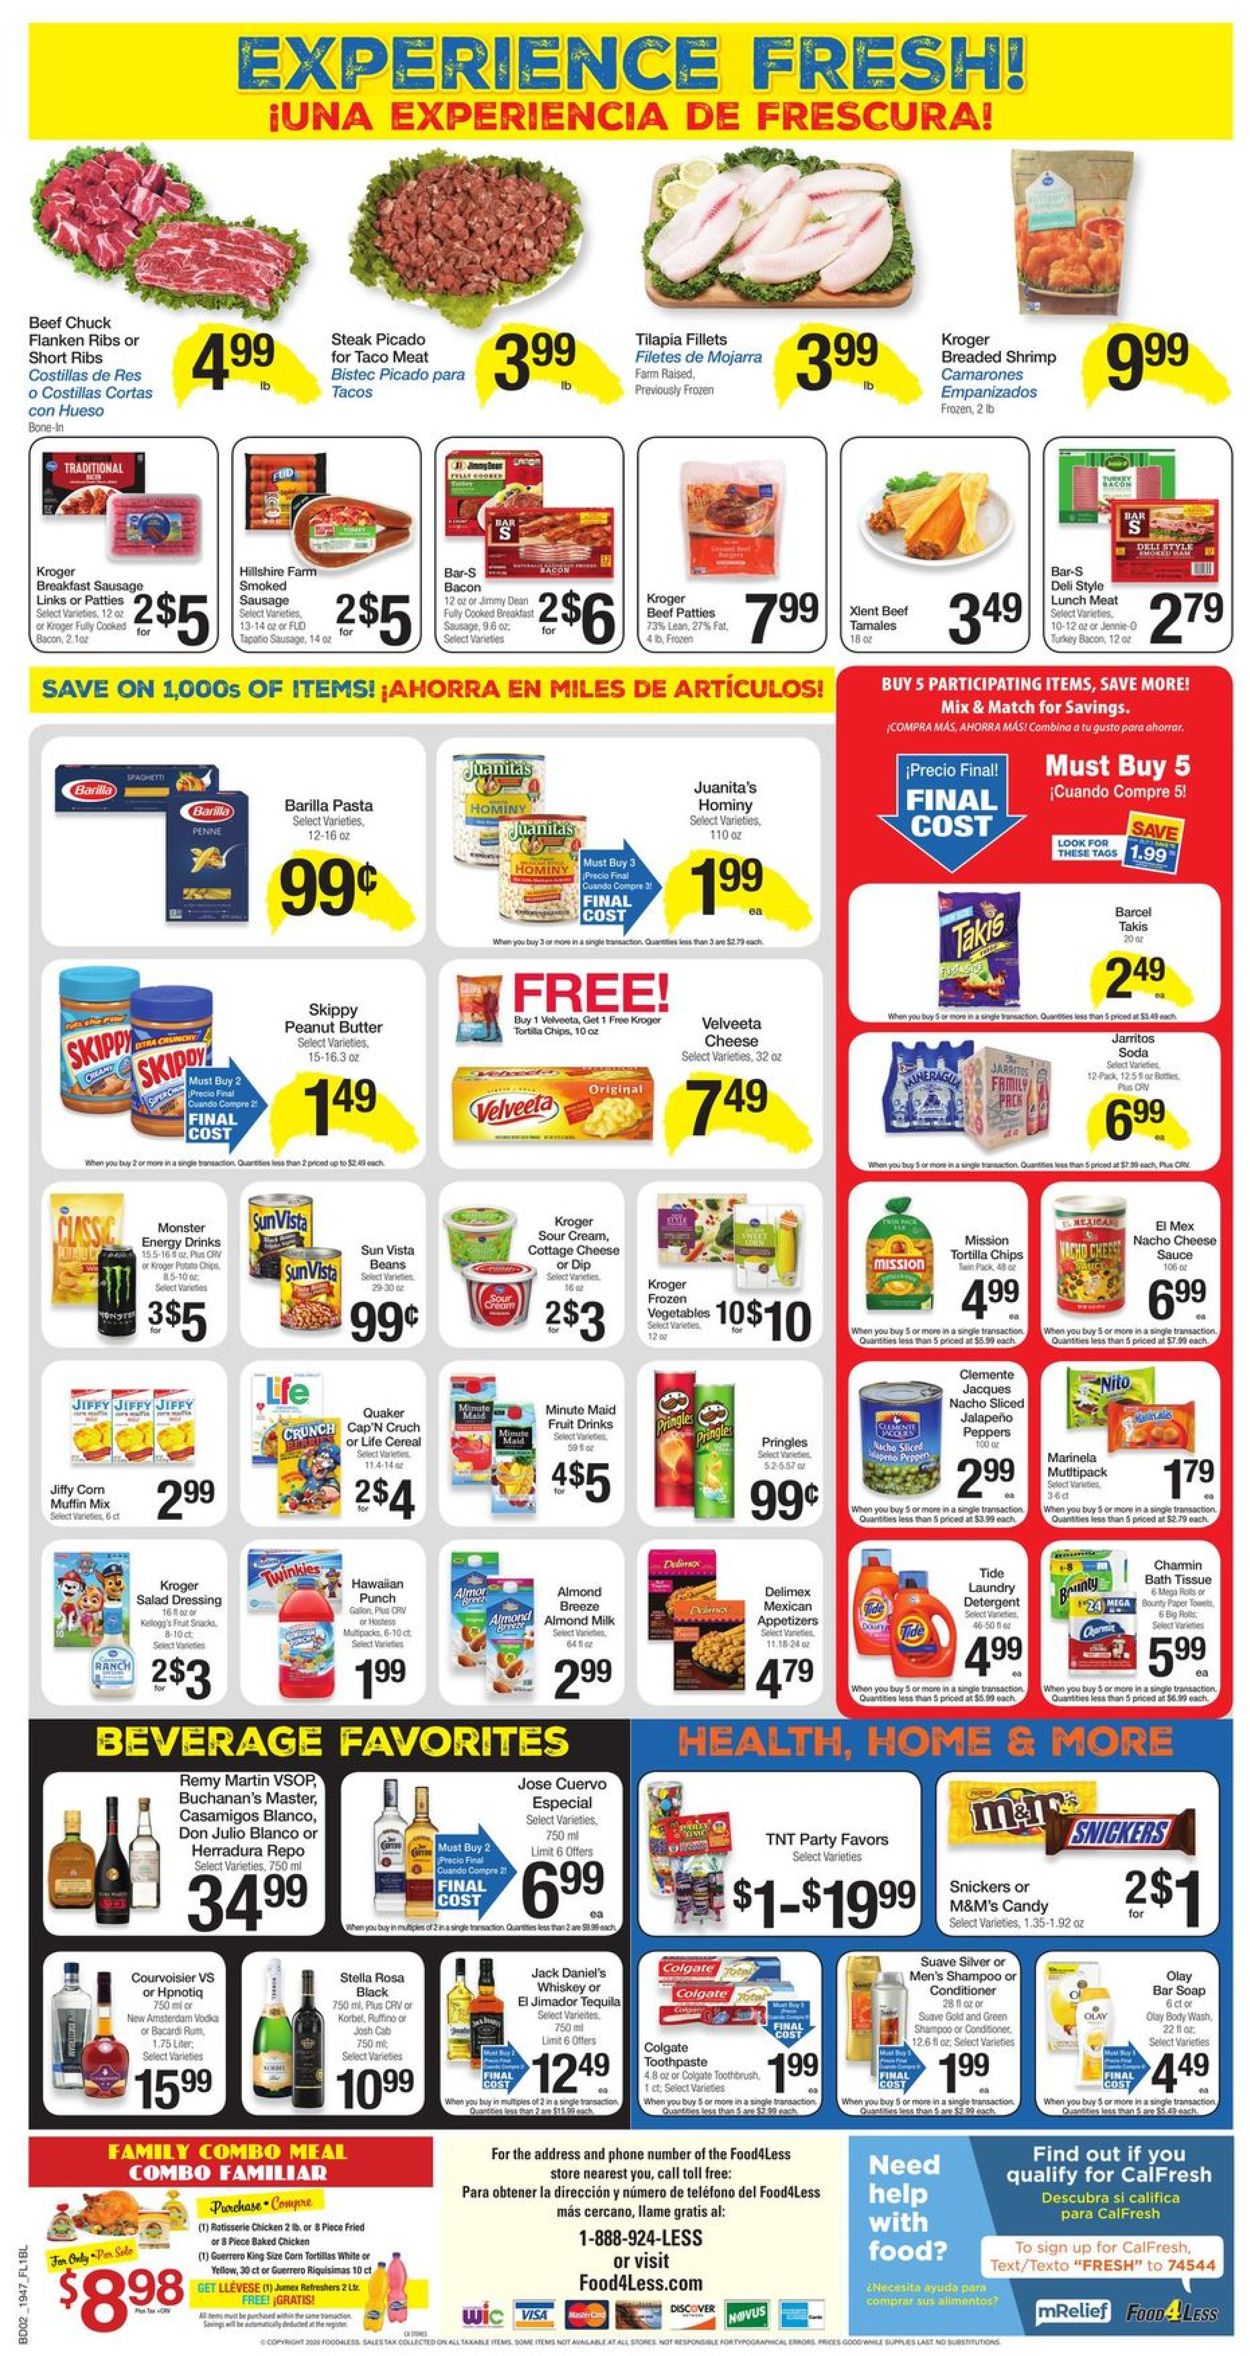 Catalogue Food 4 Less - New Year's Ad 2019/2020 from 12/26/2019